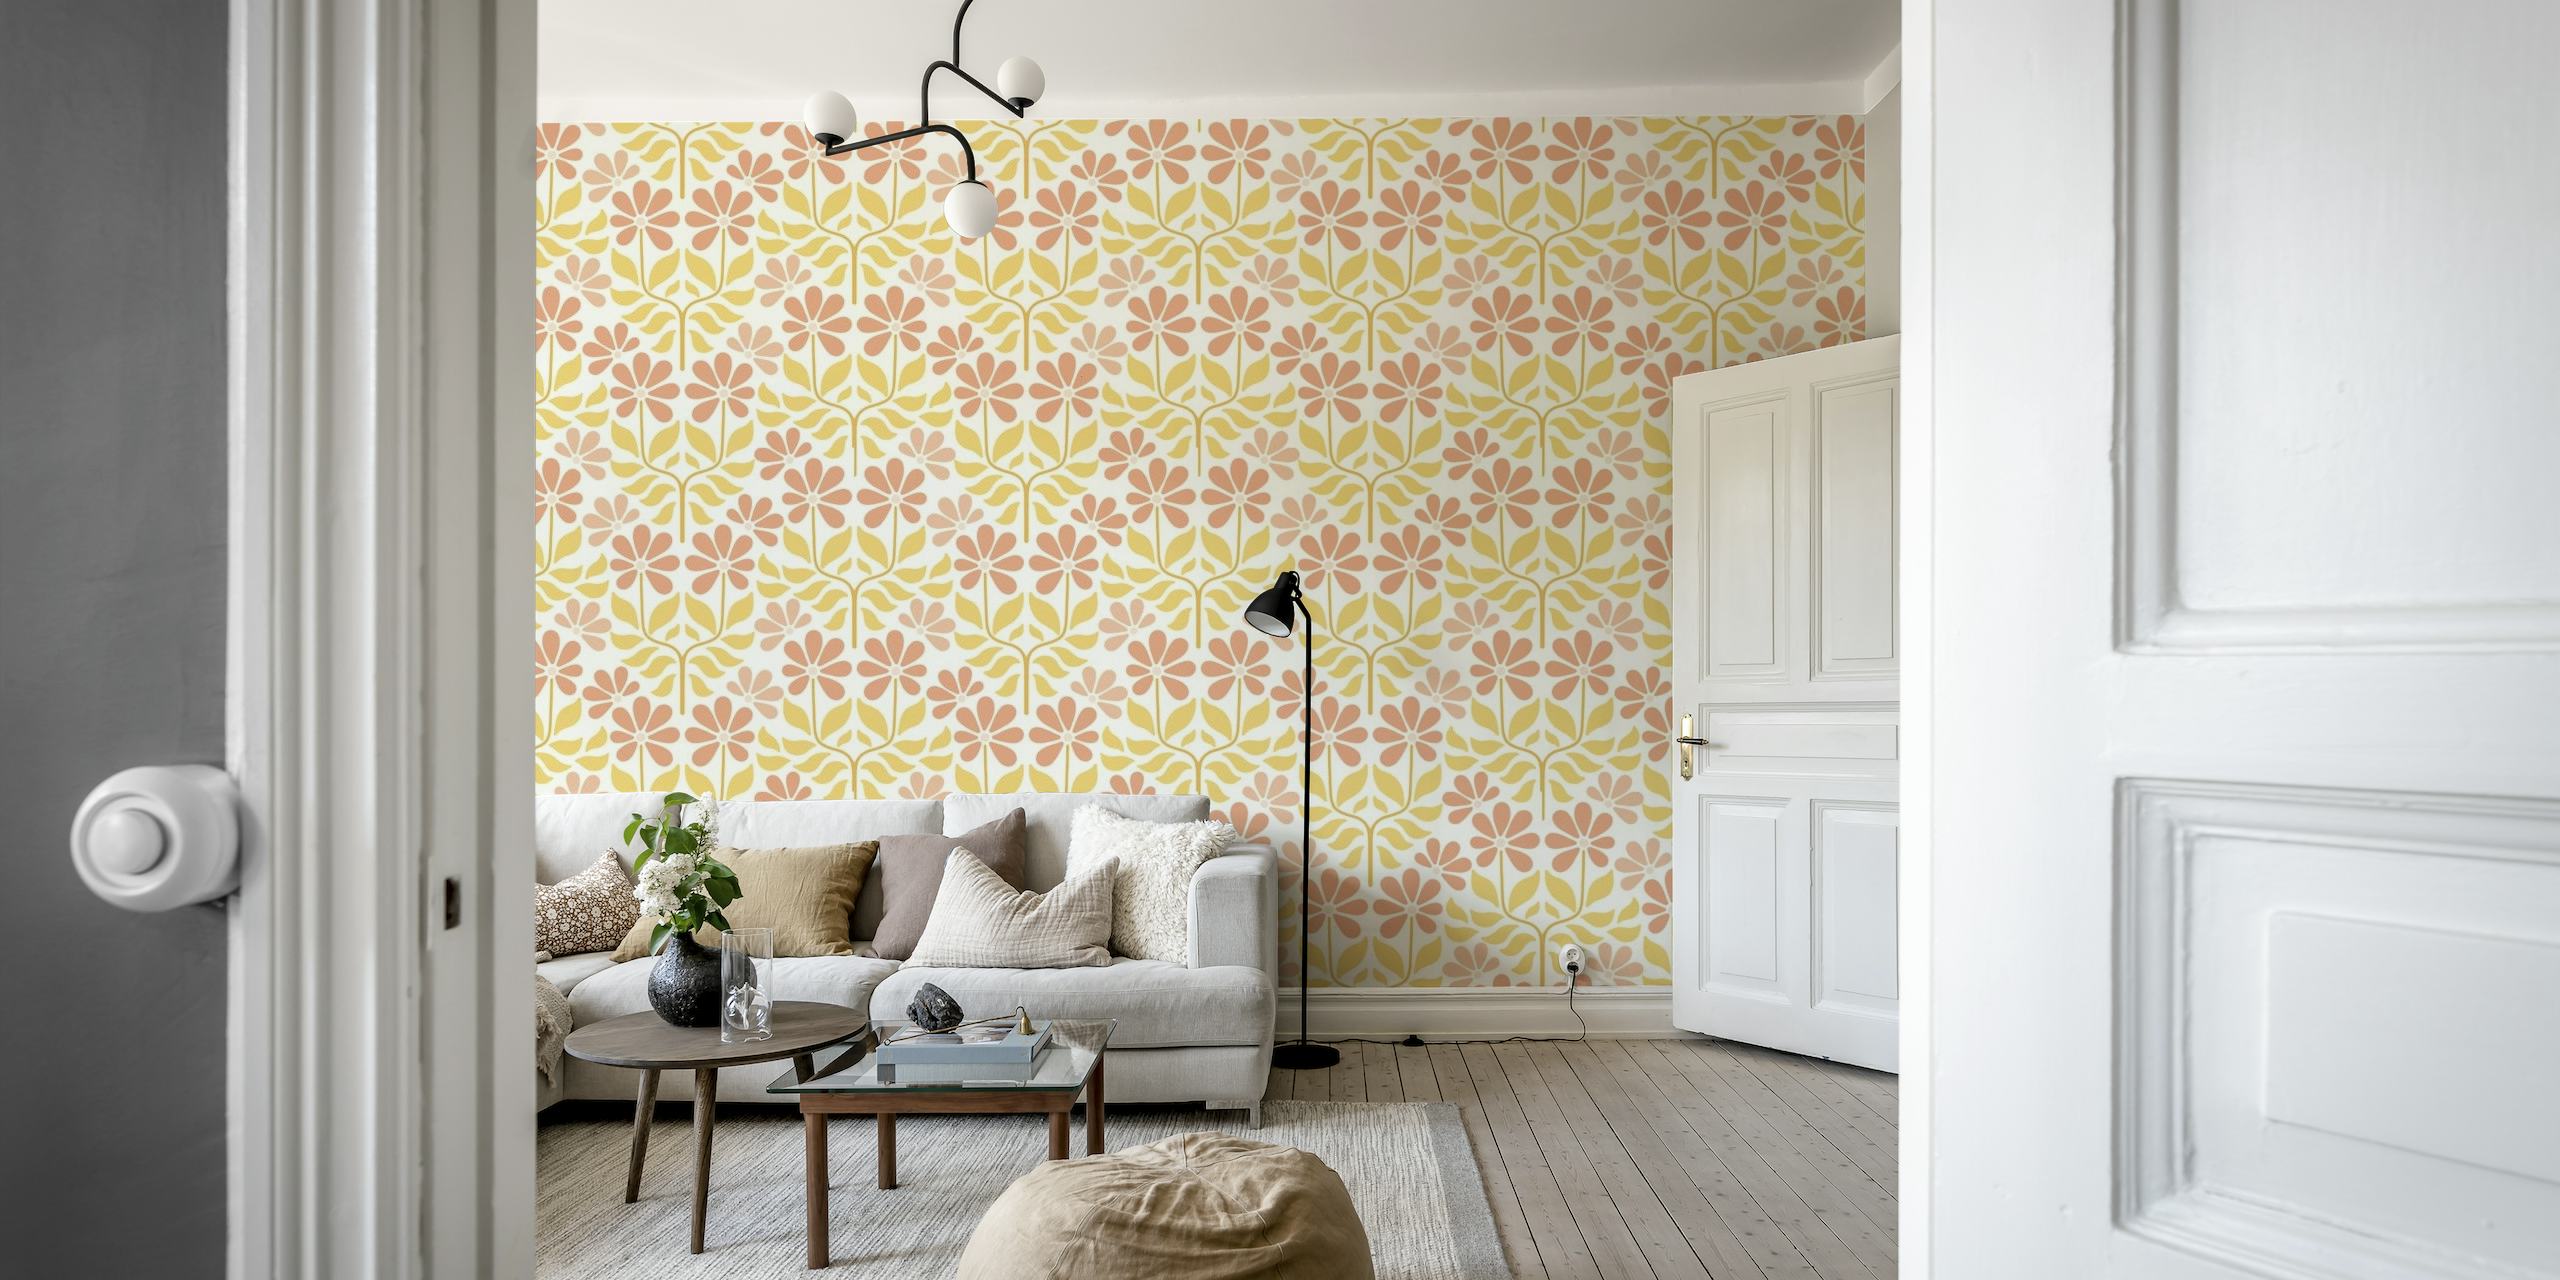 Boho Flowers patterned wall mural with warm coral and yellow tones on a neutral background.